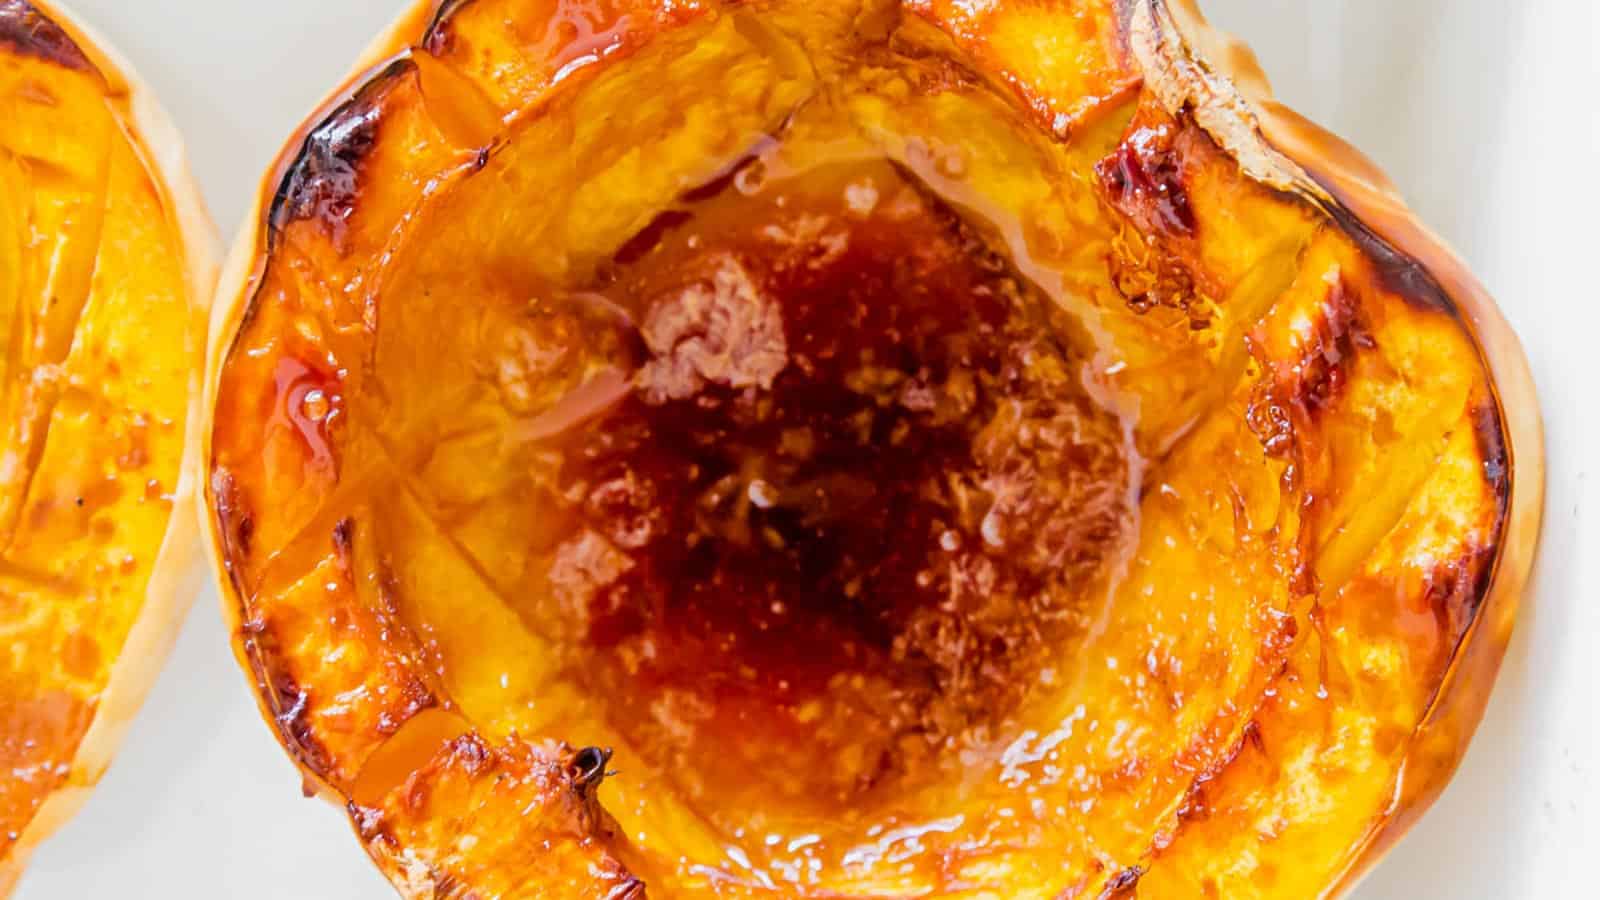 Two halves of a roasted white acorn squash in a white baking dish with maple syrup.